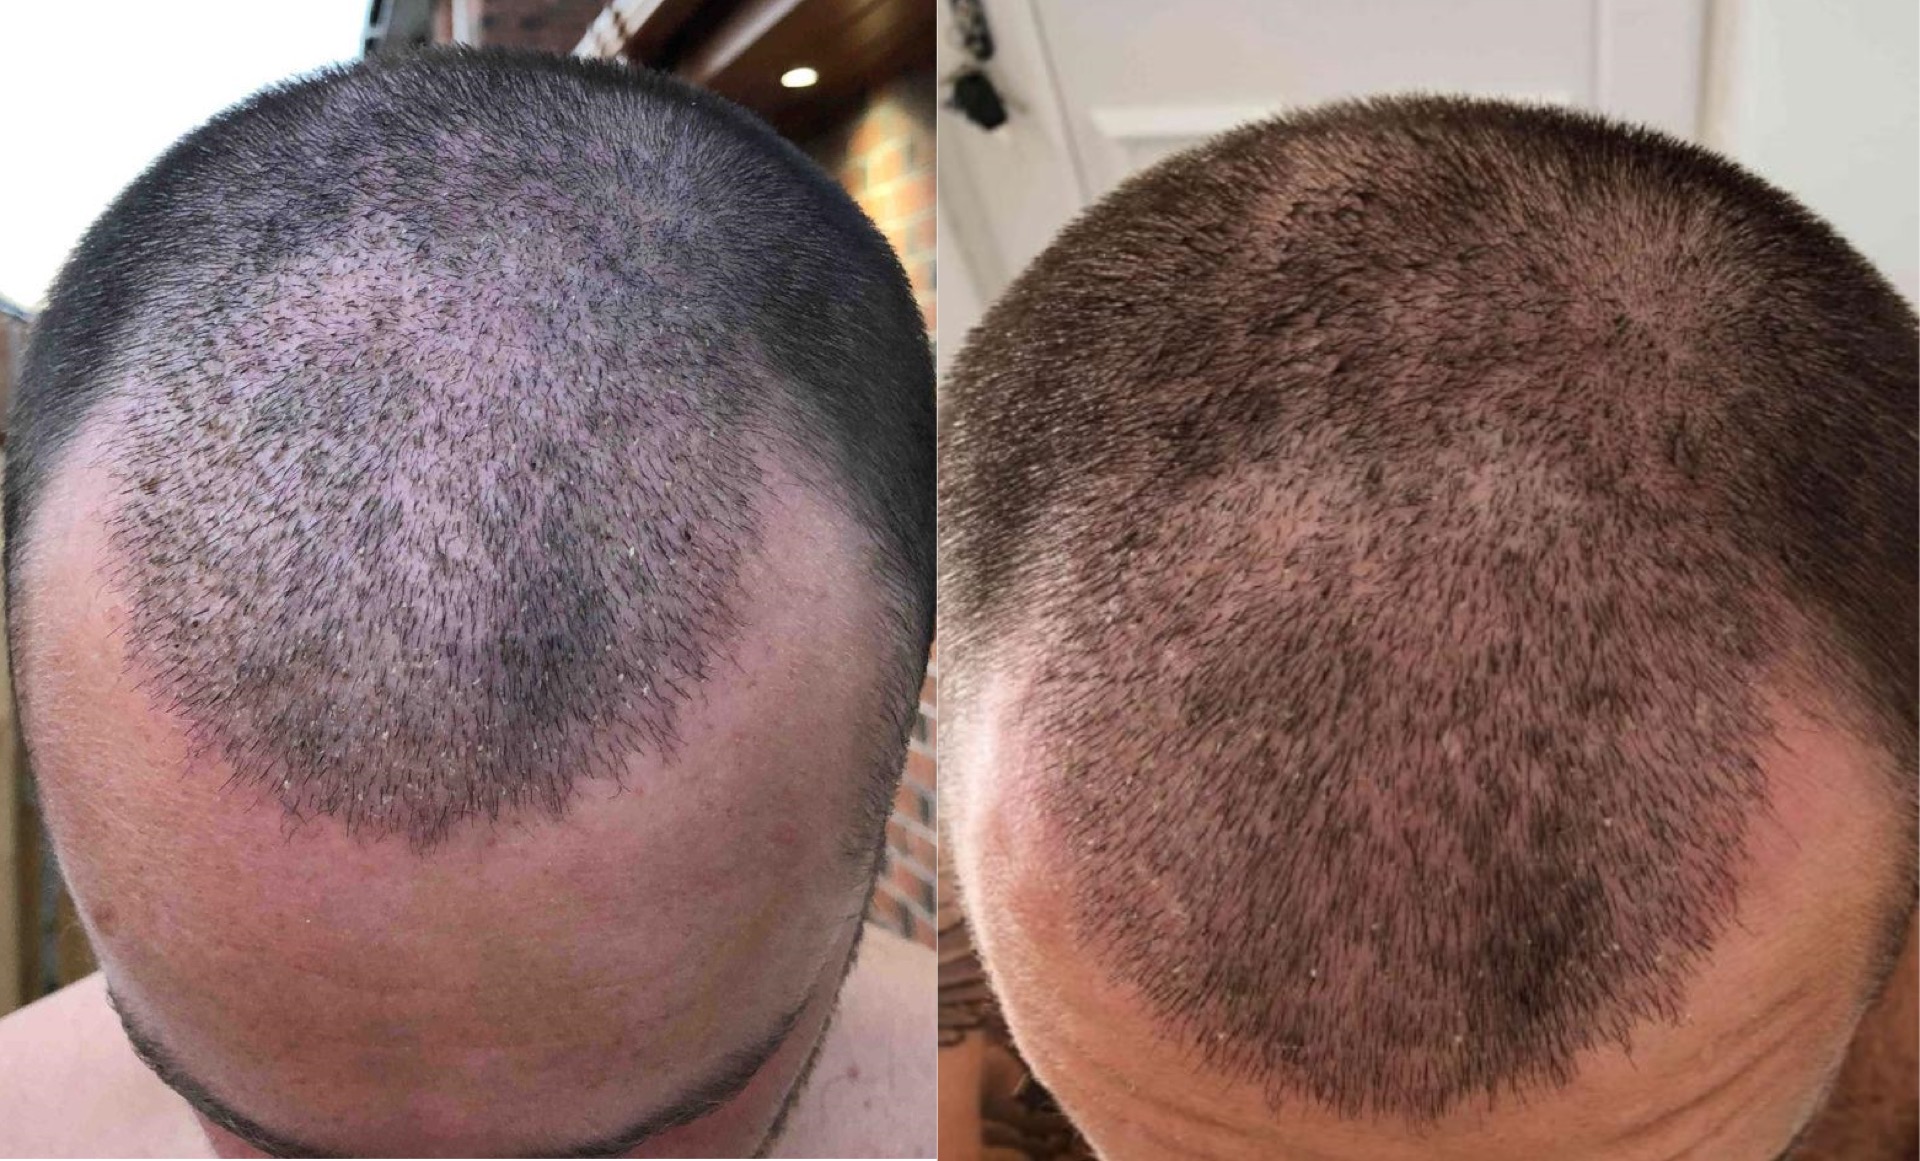 Photos of the hairline taken on Day 13 and Day 15